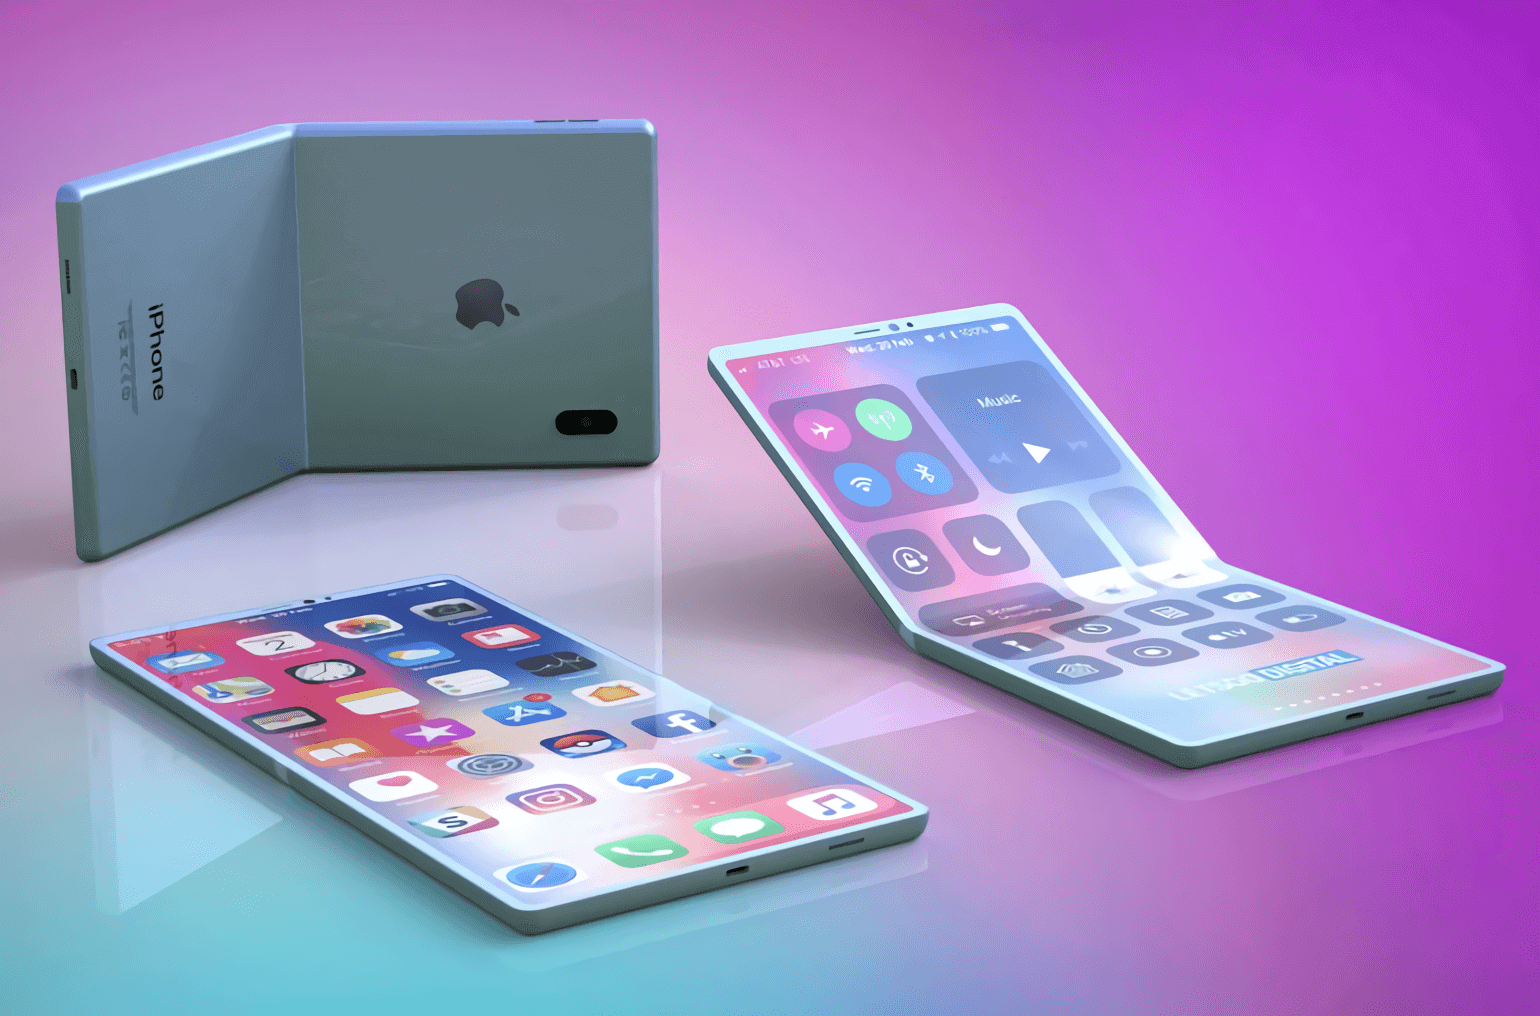 Apple's foldable phone patent does not guarantee we will see (more) bending iPhones